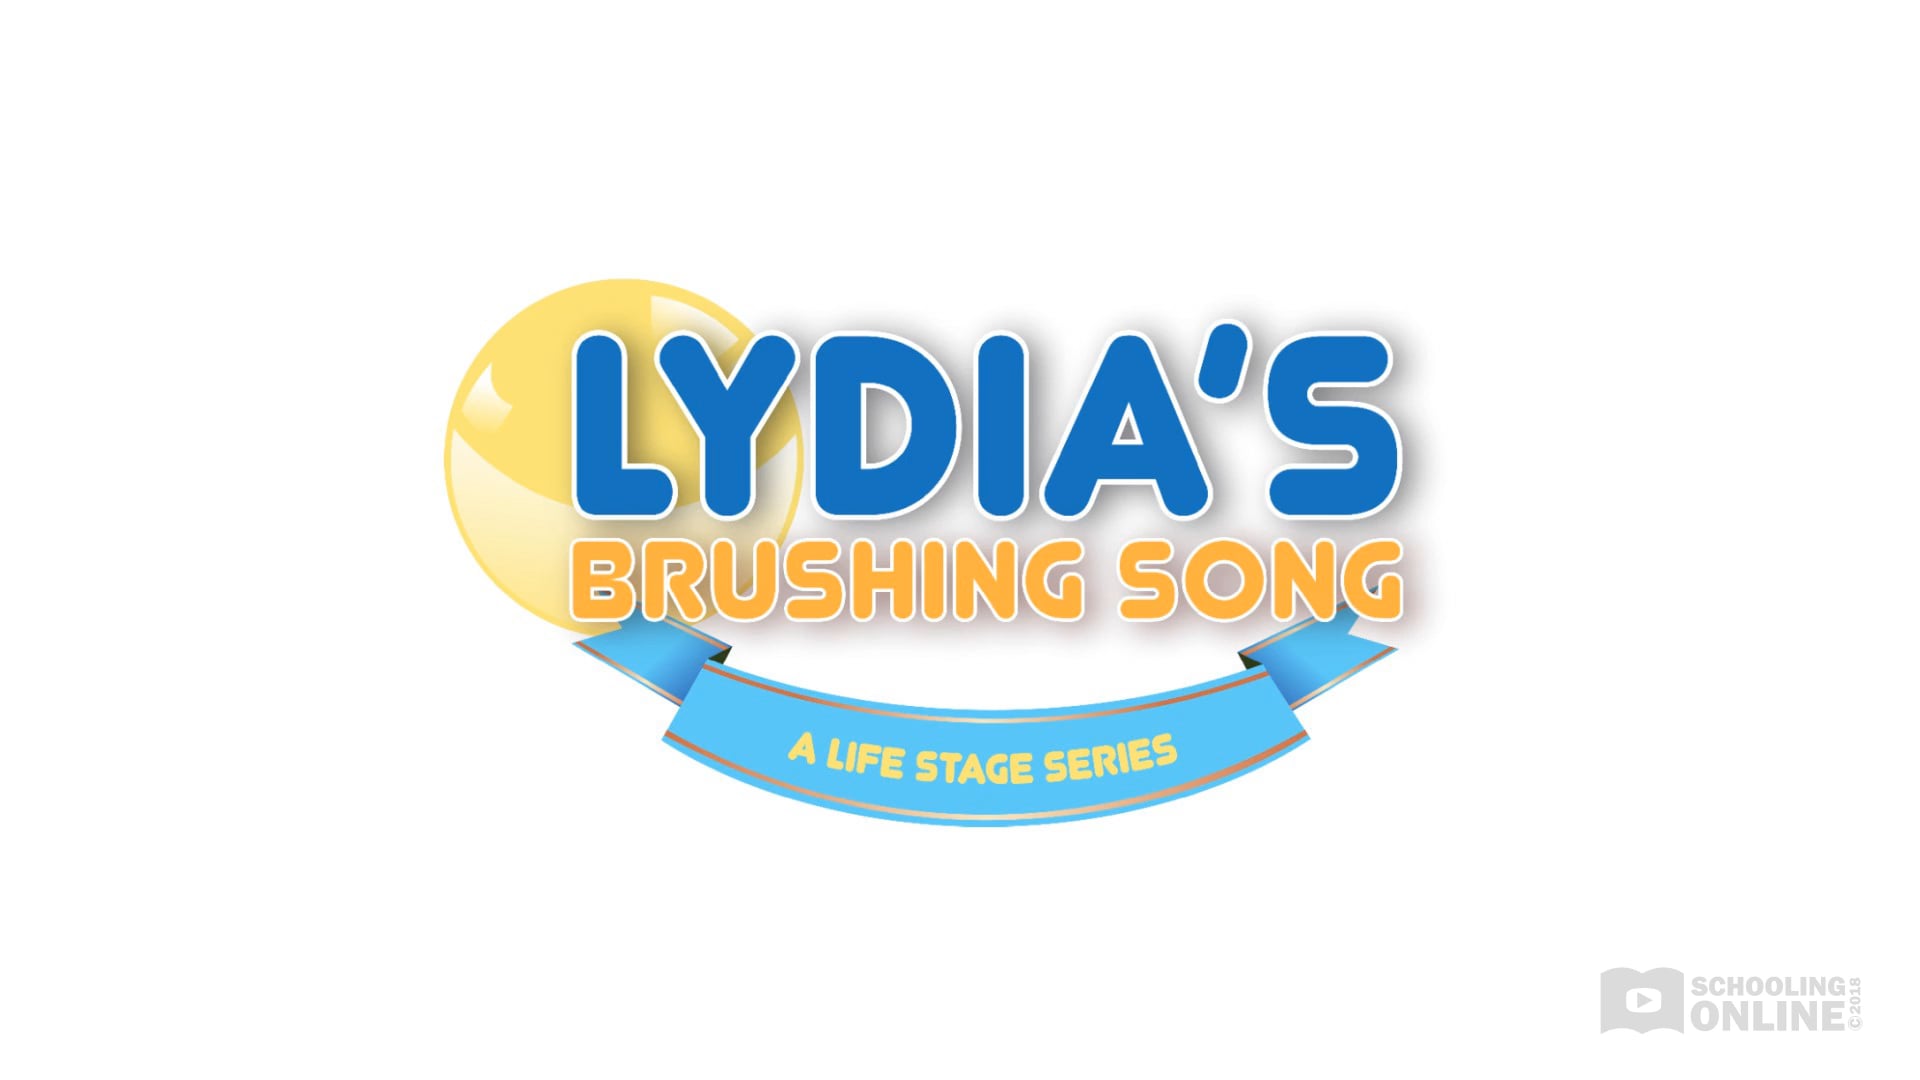 Lydia’s Brushing Song - The Life Stage Series